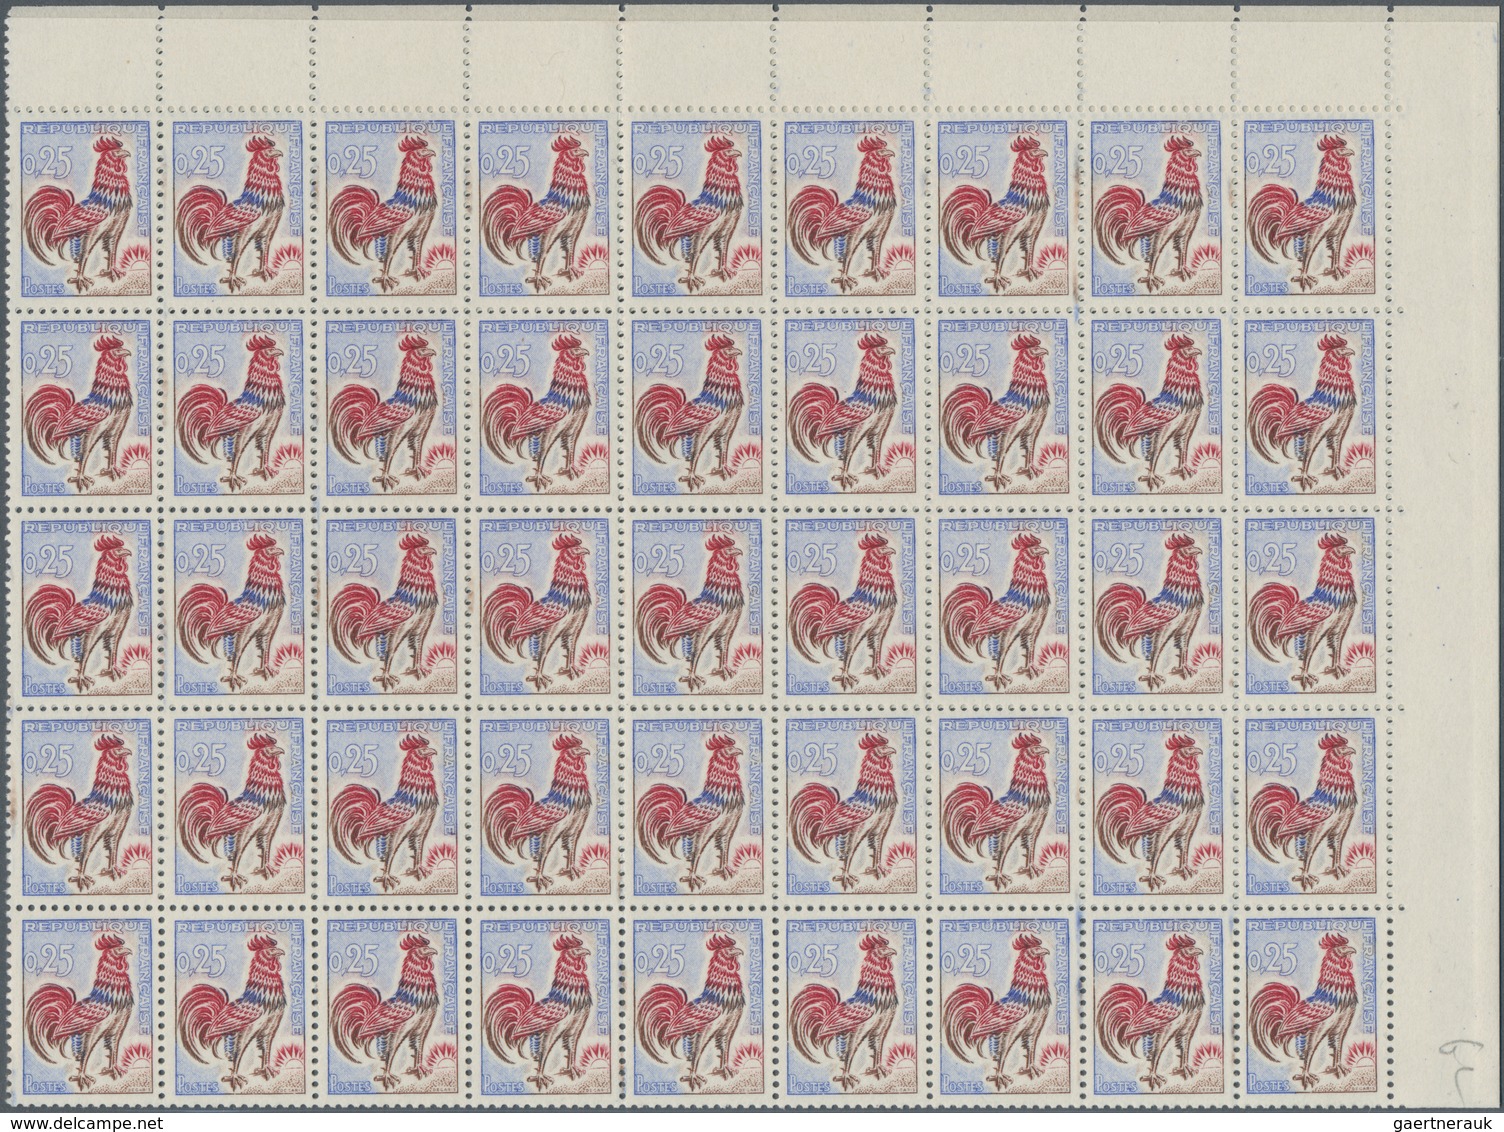 Frankreich: 1940/1966, comprehensive MNH stock, well filled and sorted on stockcards, mainly commemo